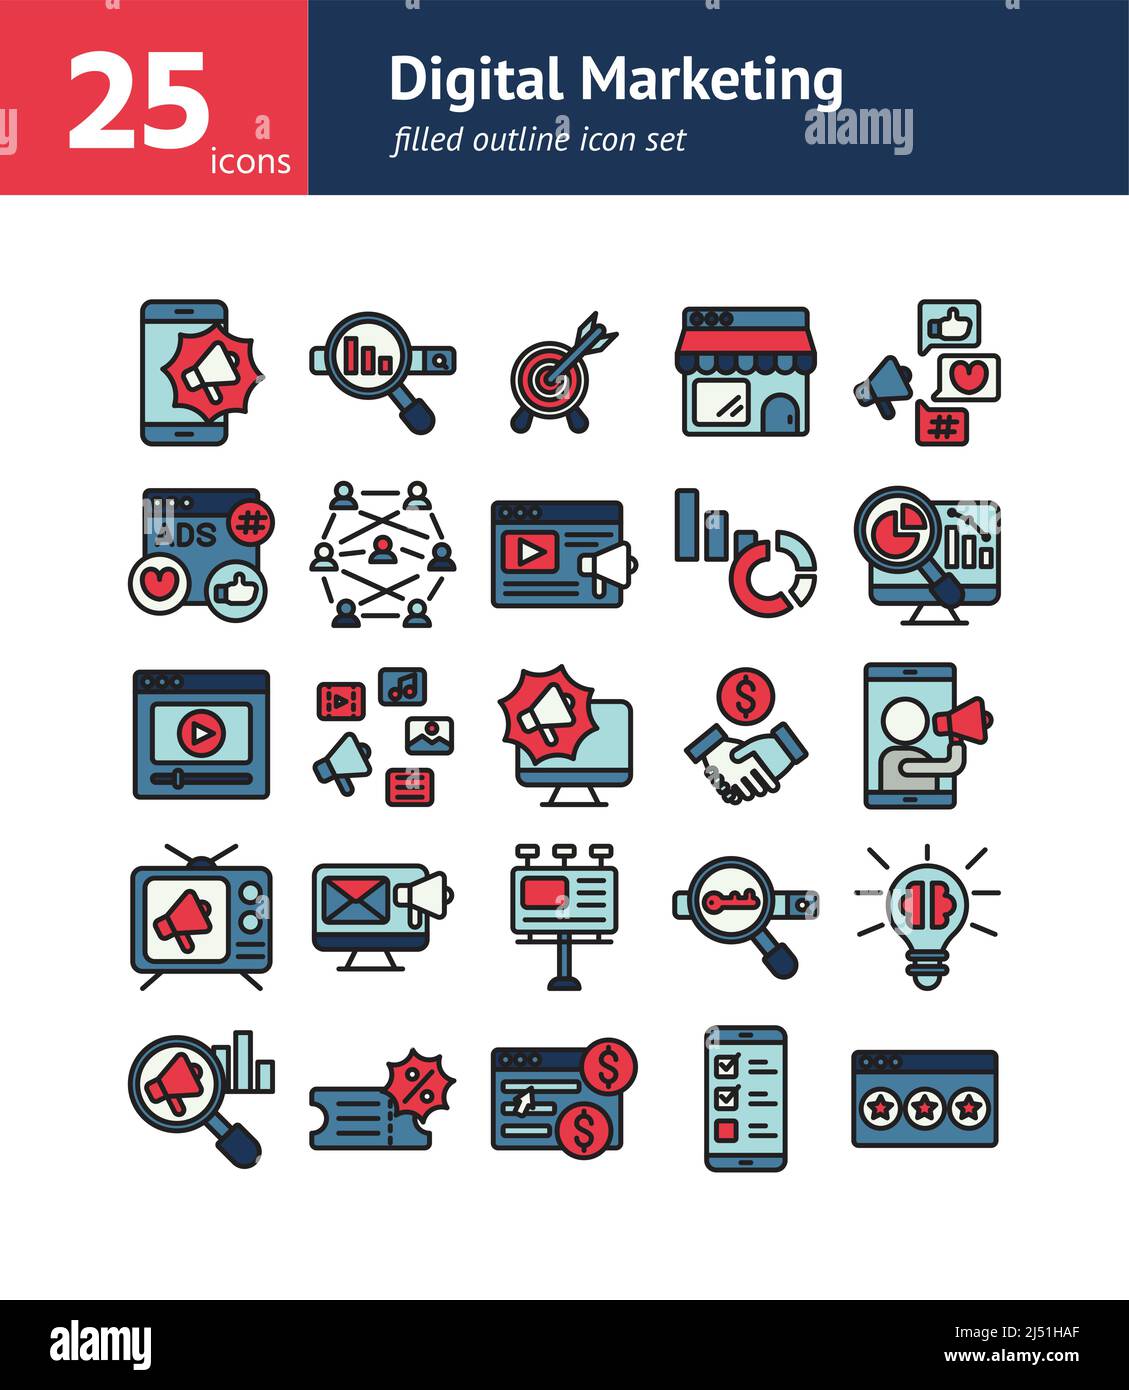 Digital Marketing filled outline icon set. Vector and Illustration. Stock Vector